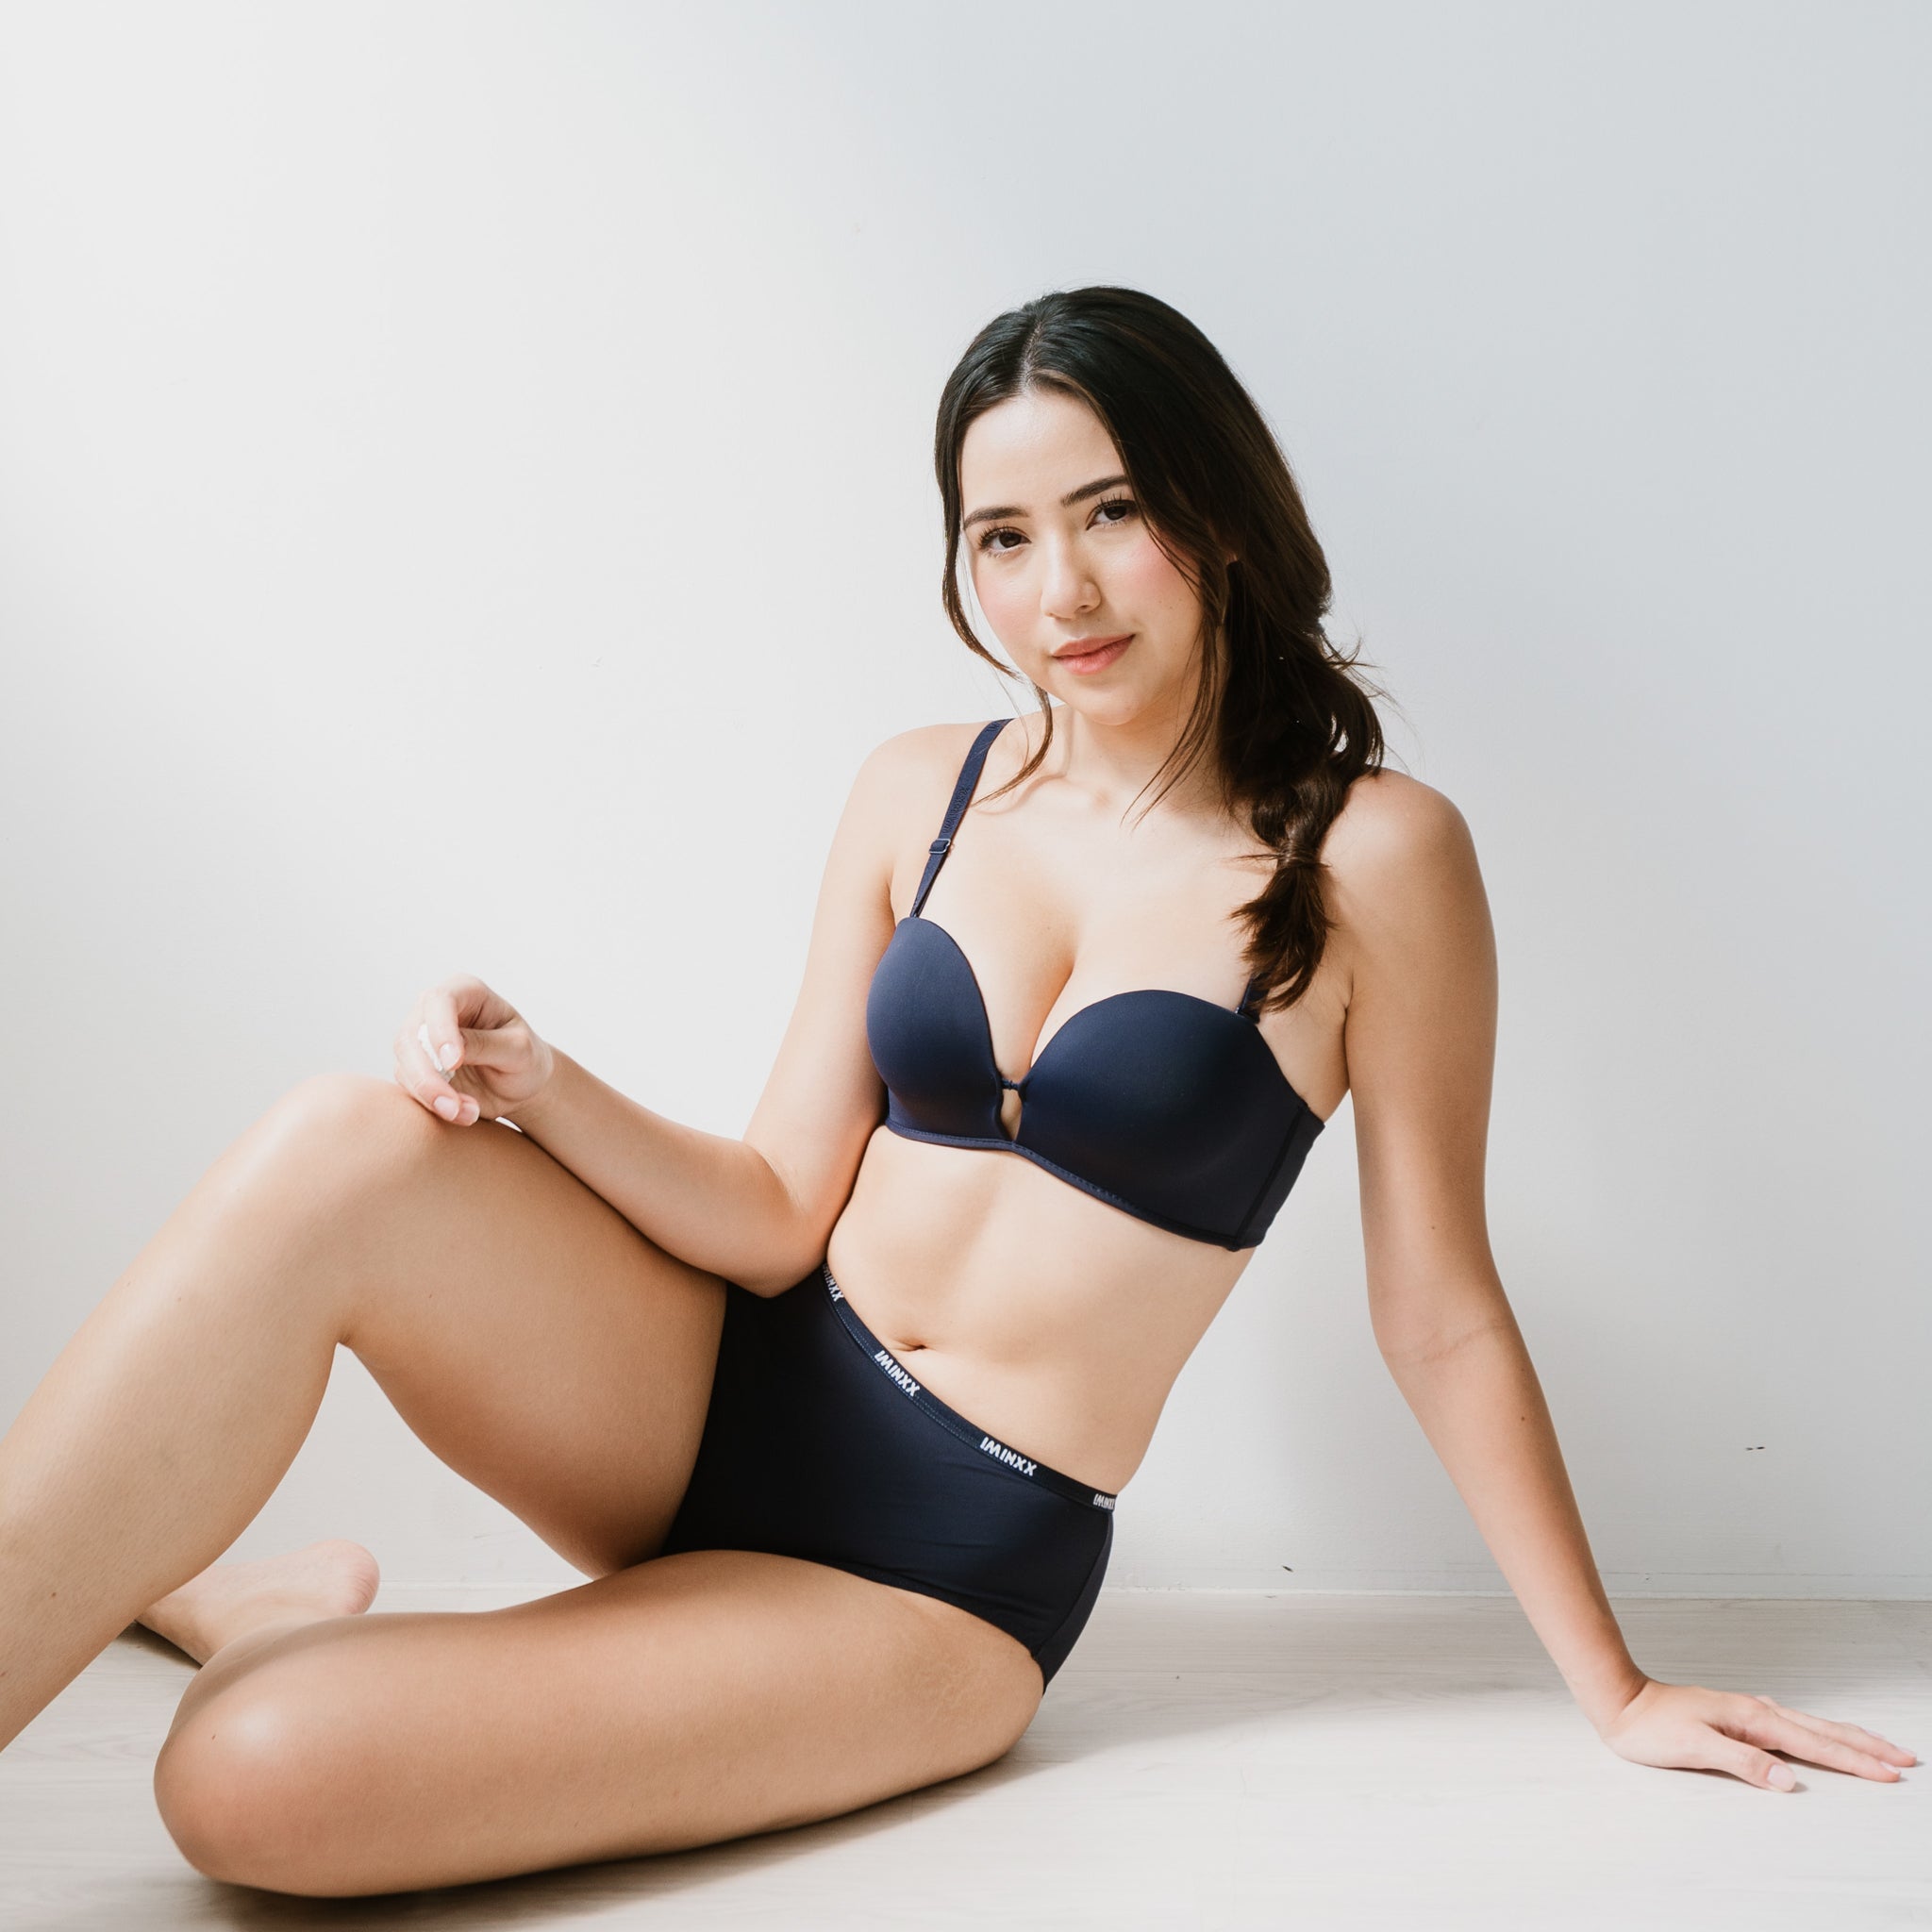 Midnightdivas - The Extreme Lift Bra <3 LKR 2,500/- The strapless,  backless, stick-on, push-up wing bra that makes a women's breasts look  fuller with more cleavage!. WHO DOESN'T WANT THAT EXTRA LIFT? 